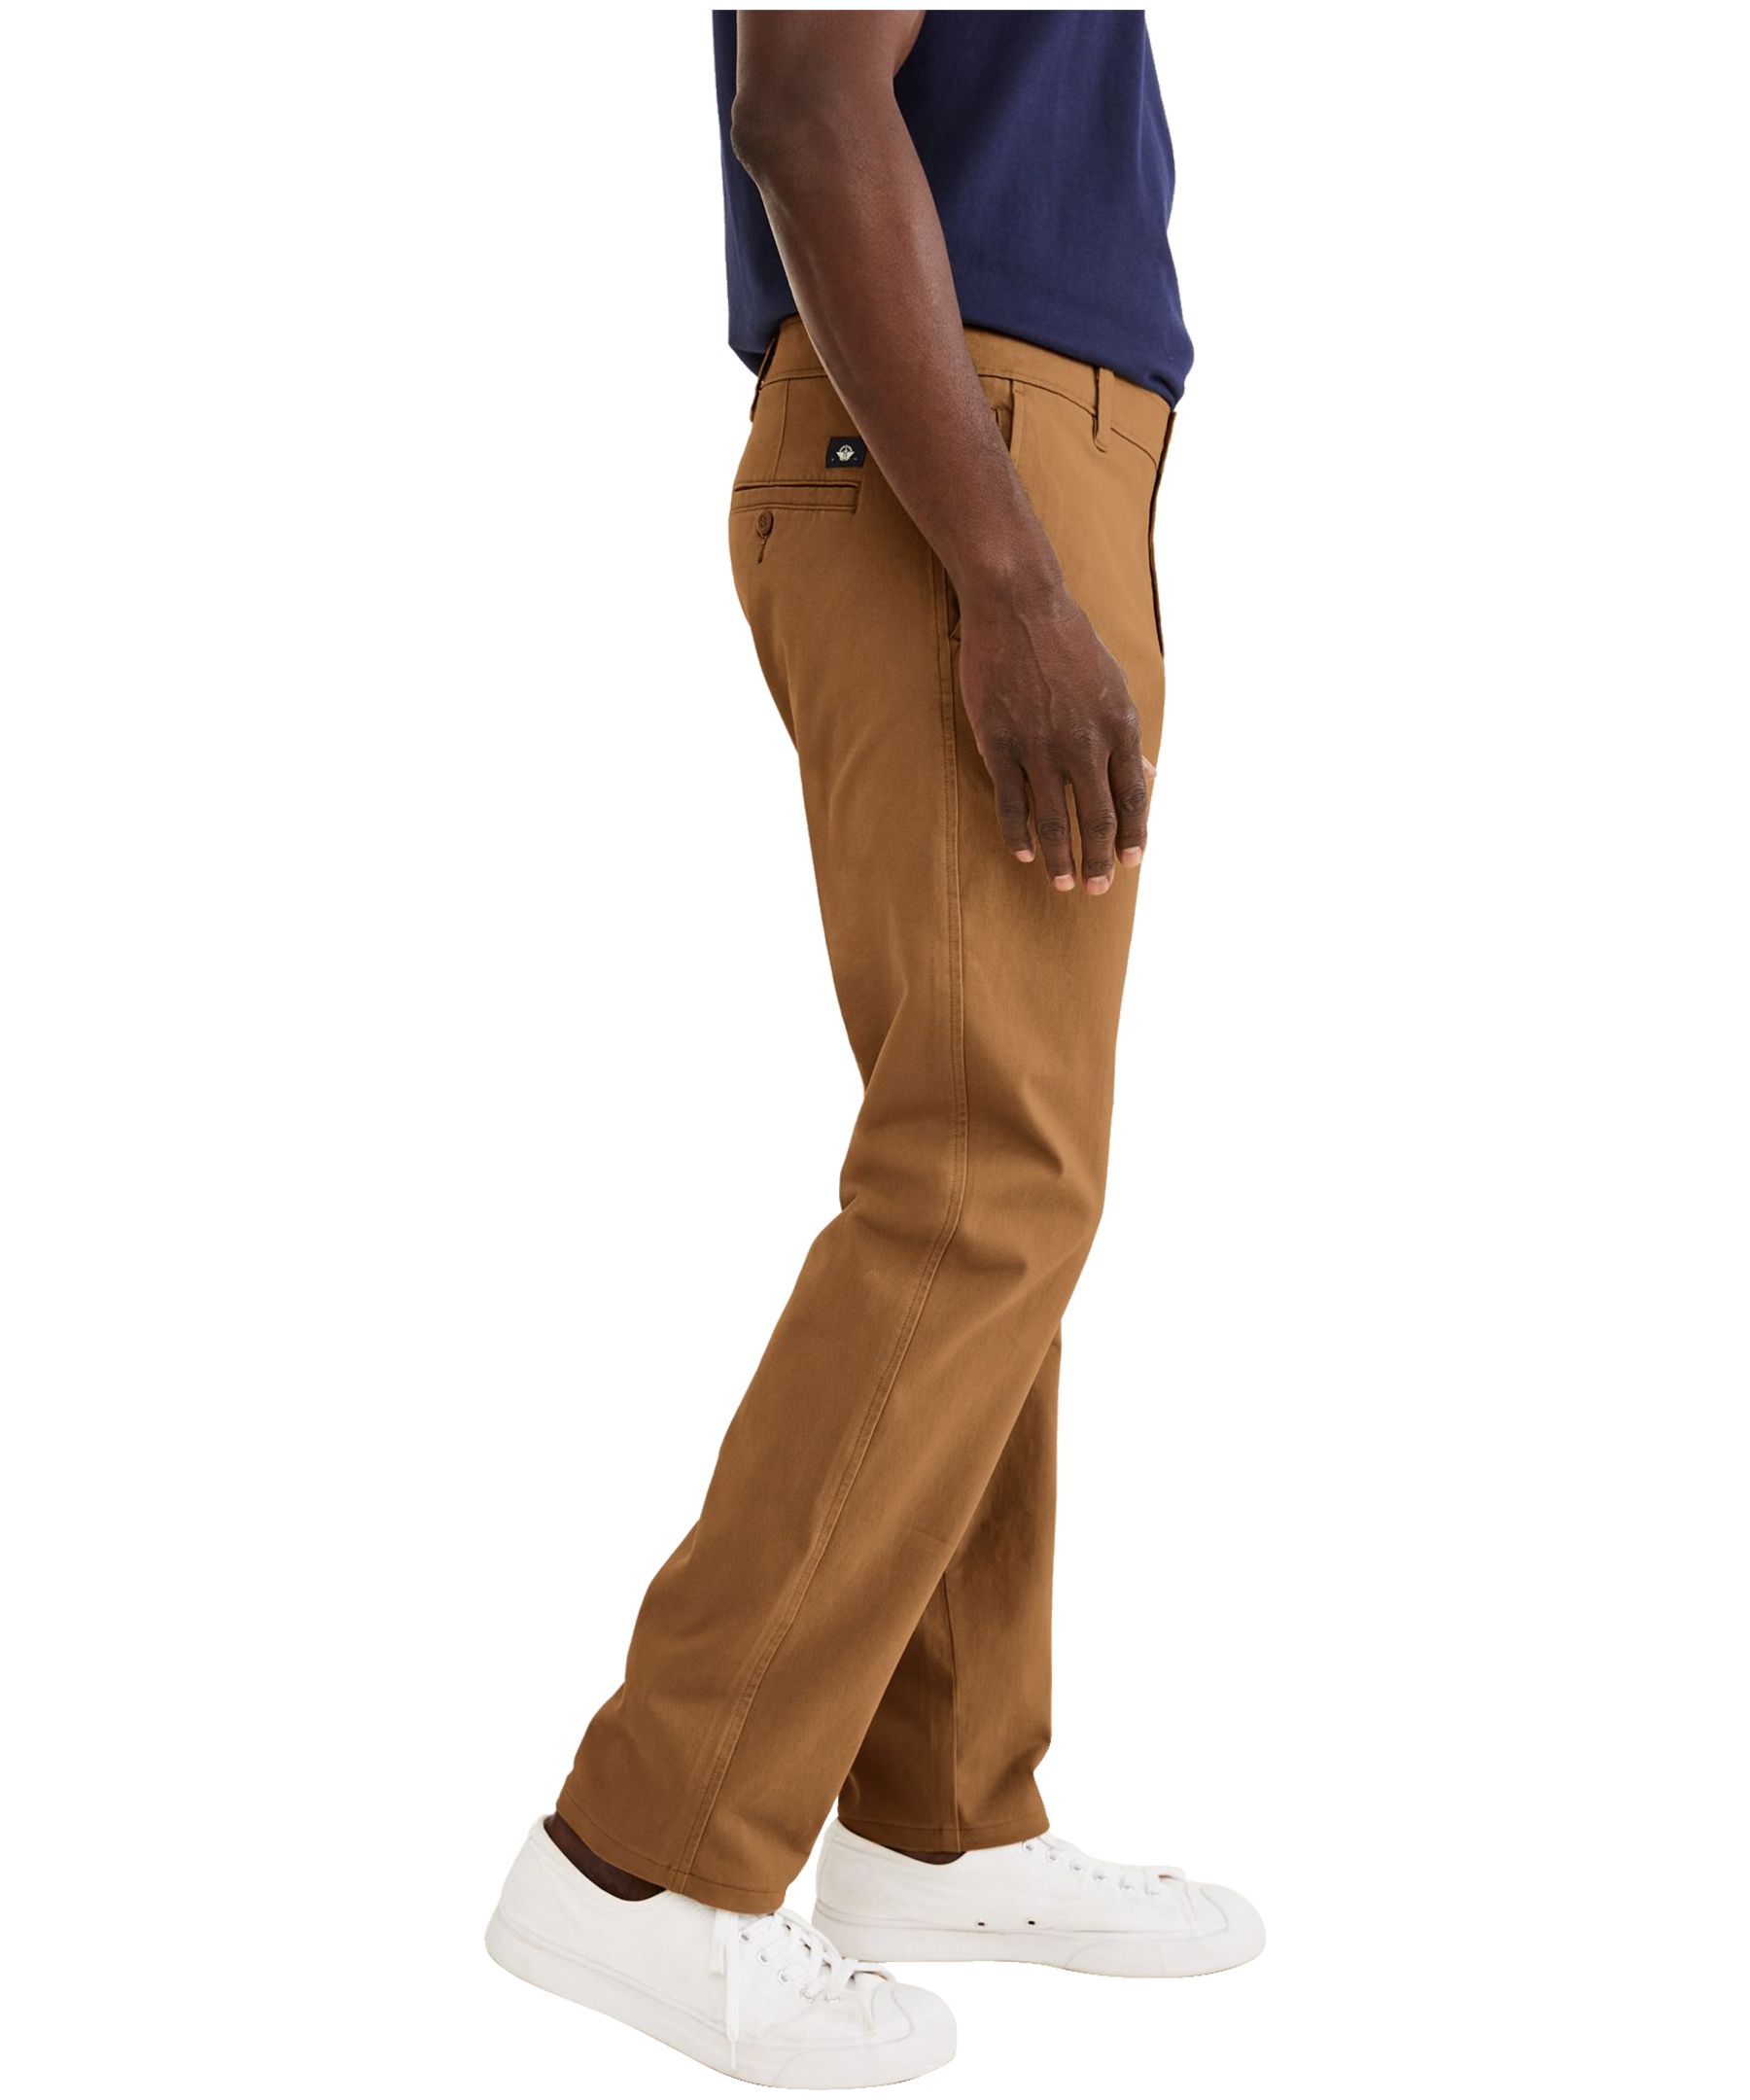 Dockers Slim Fit Ultimate Chino Pants With Smart 360 Flex | Zappos.com